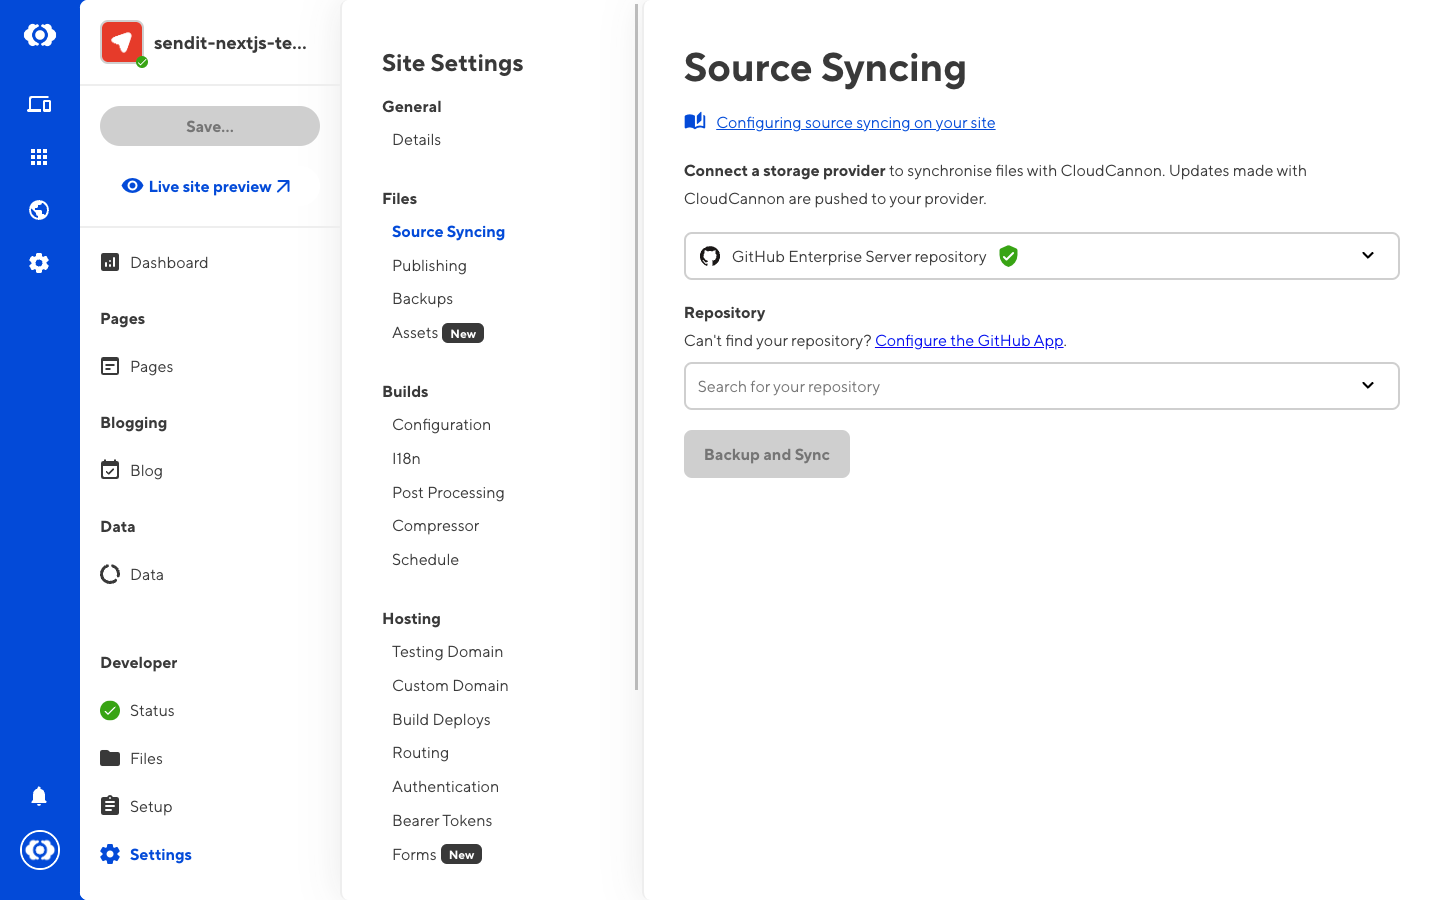 Selecting GitHub Enterprise Server as the your source syncing provider